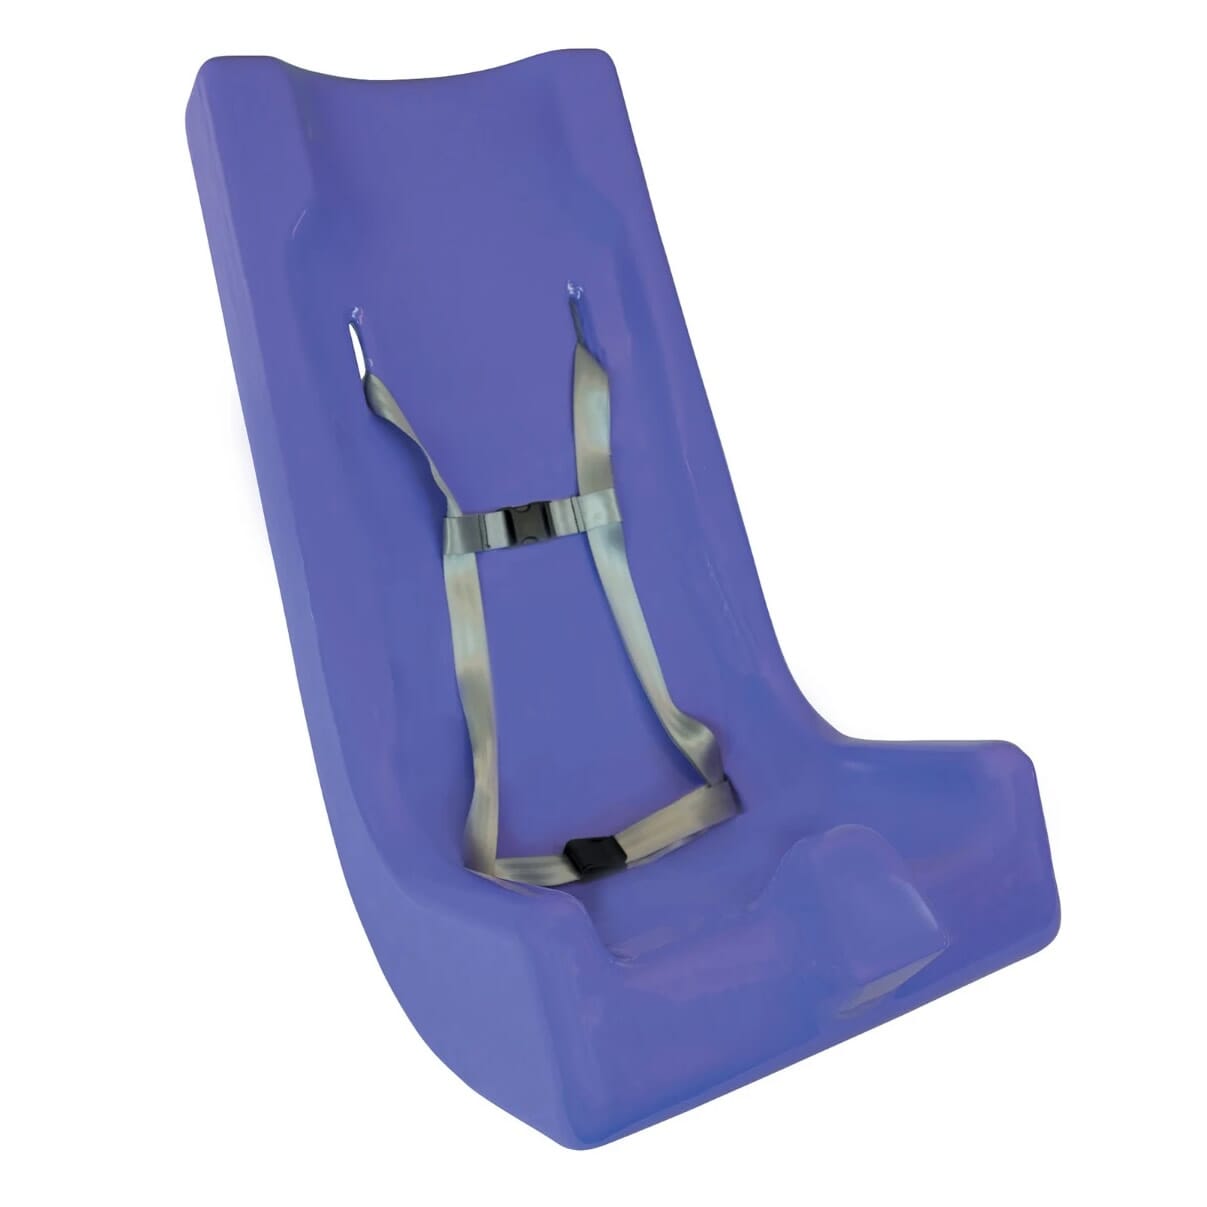 View Tumble Forms Feeder Seat Purple XLarge information